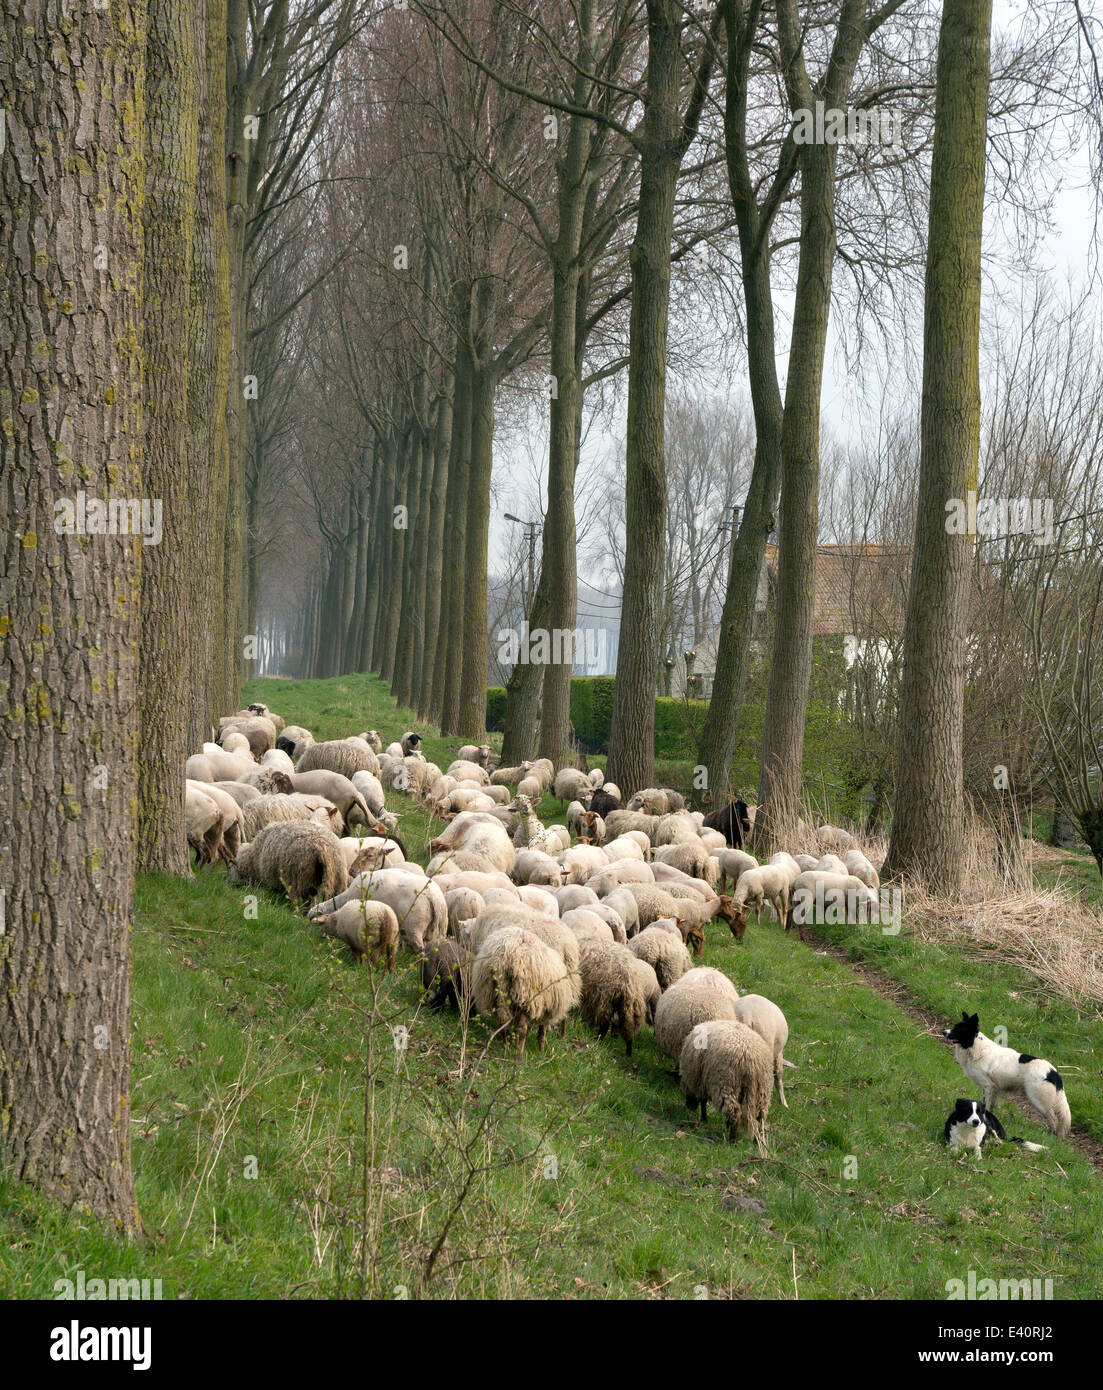 Sheepdogs herding a flock of sheep near the canal of Damme in rural Flanders in Belgium Stock Photo